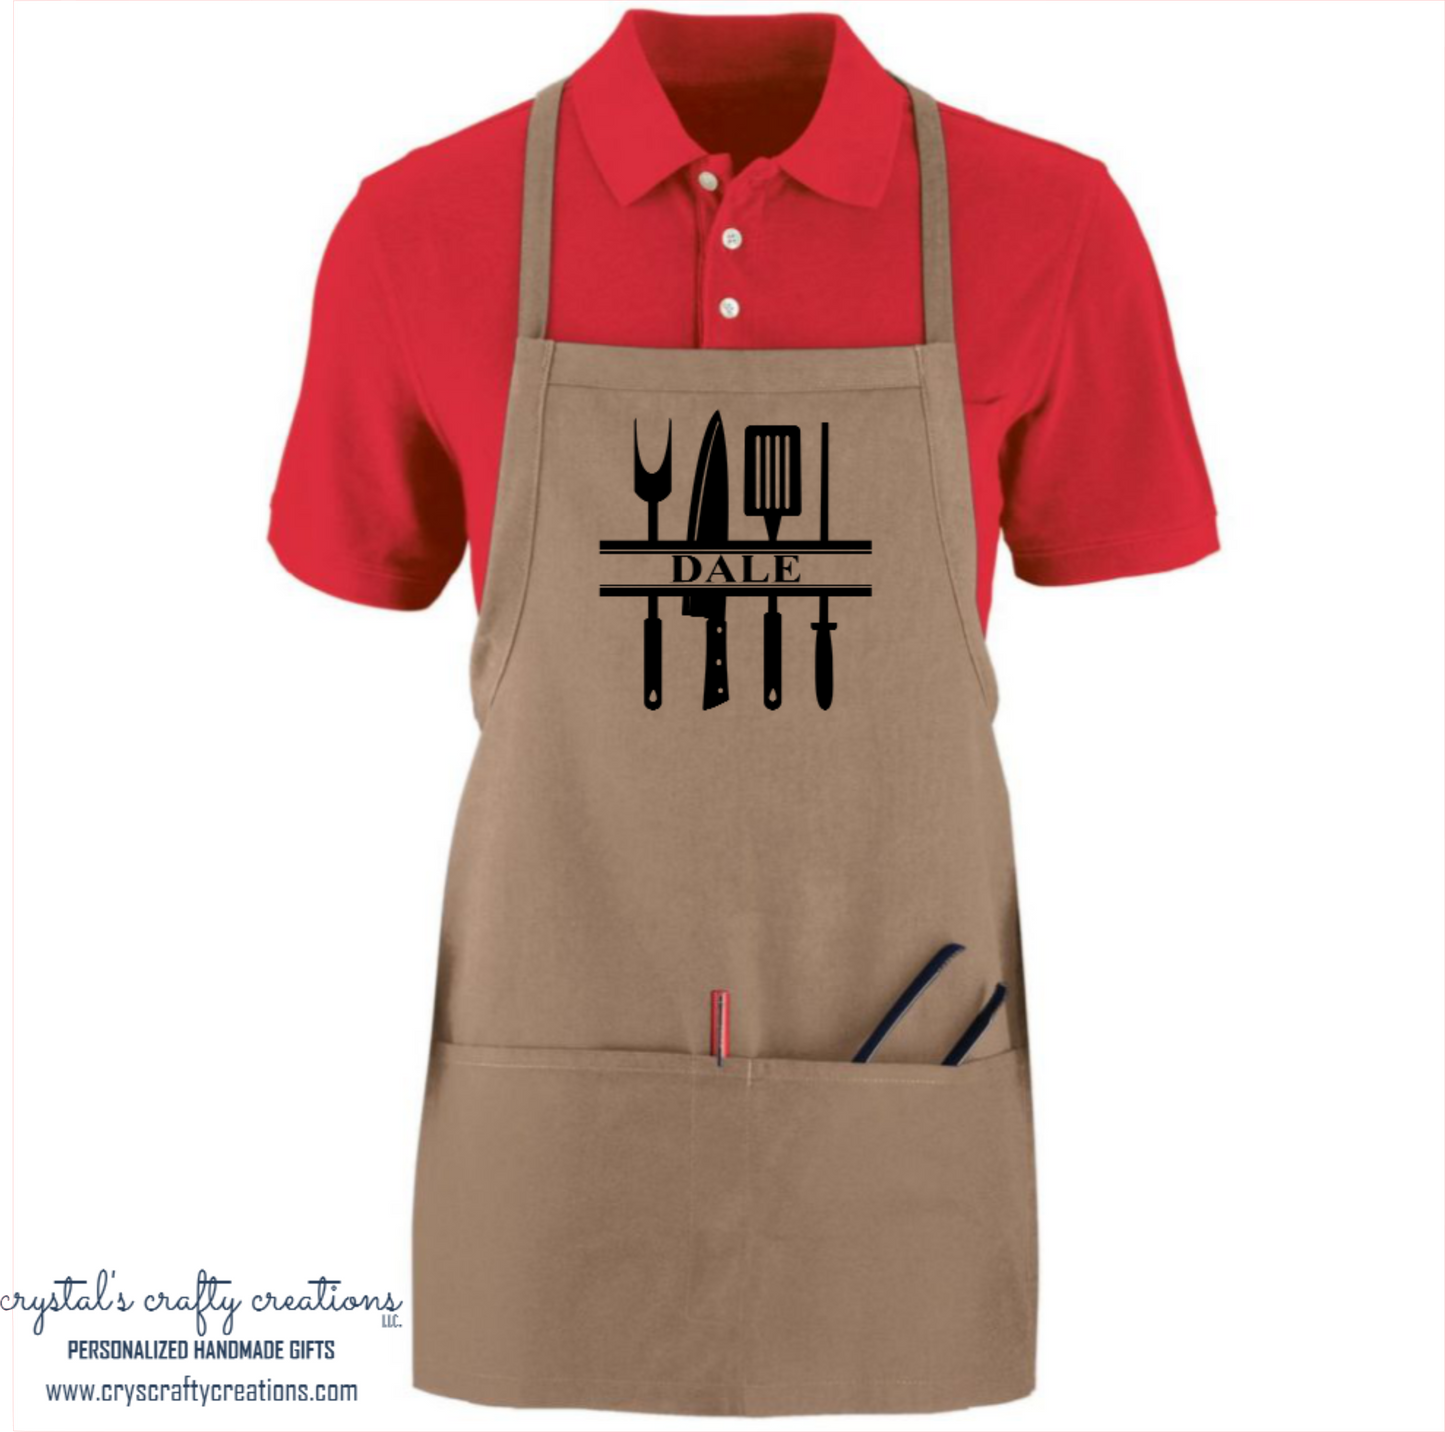 Personalized Name Cooking Utensils Kitchen Apron